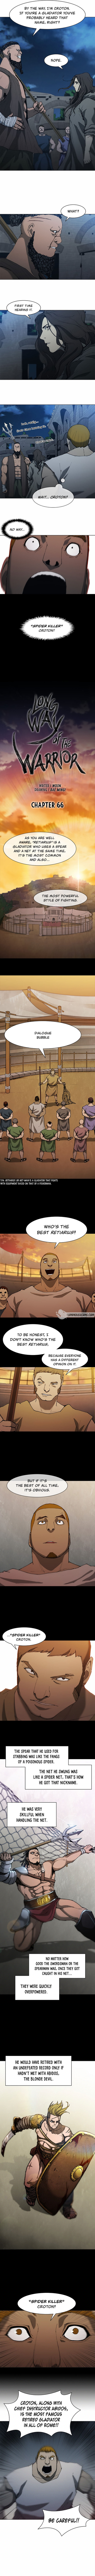 Long Way of the Warrior - Chapter 66 Page 4